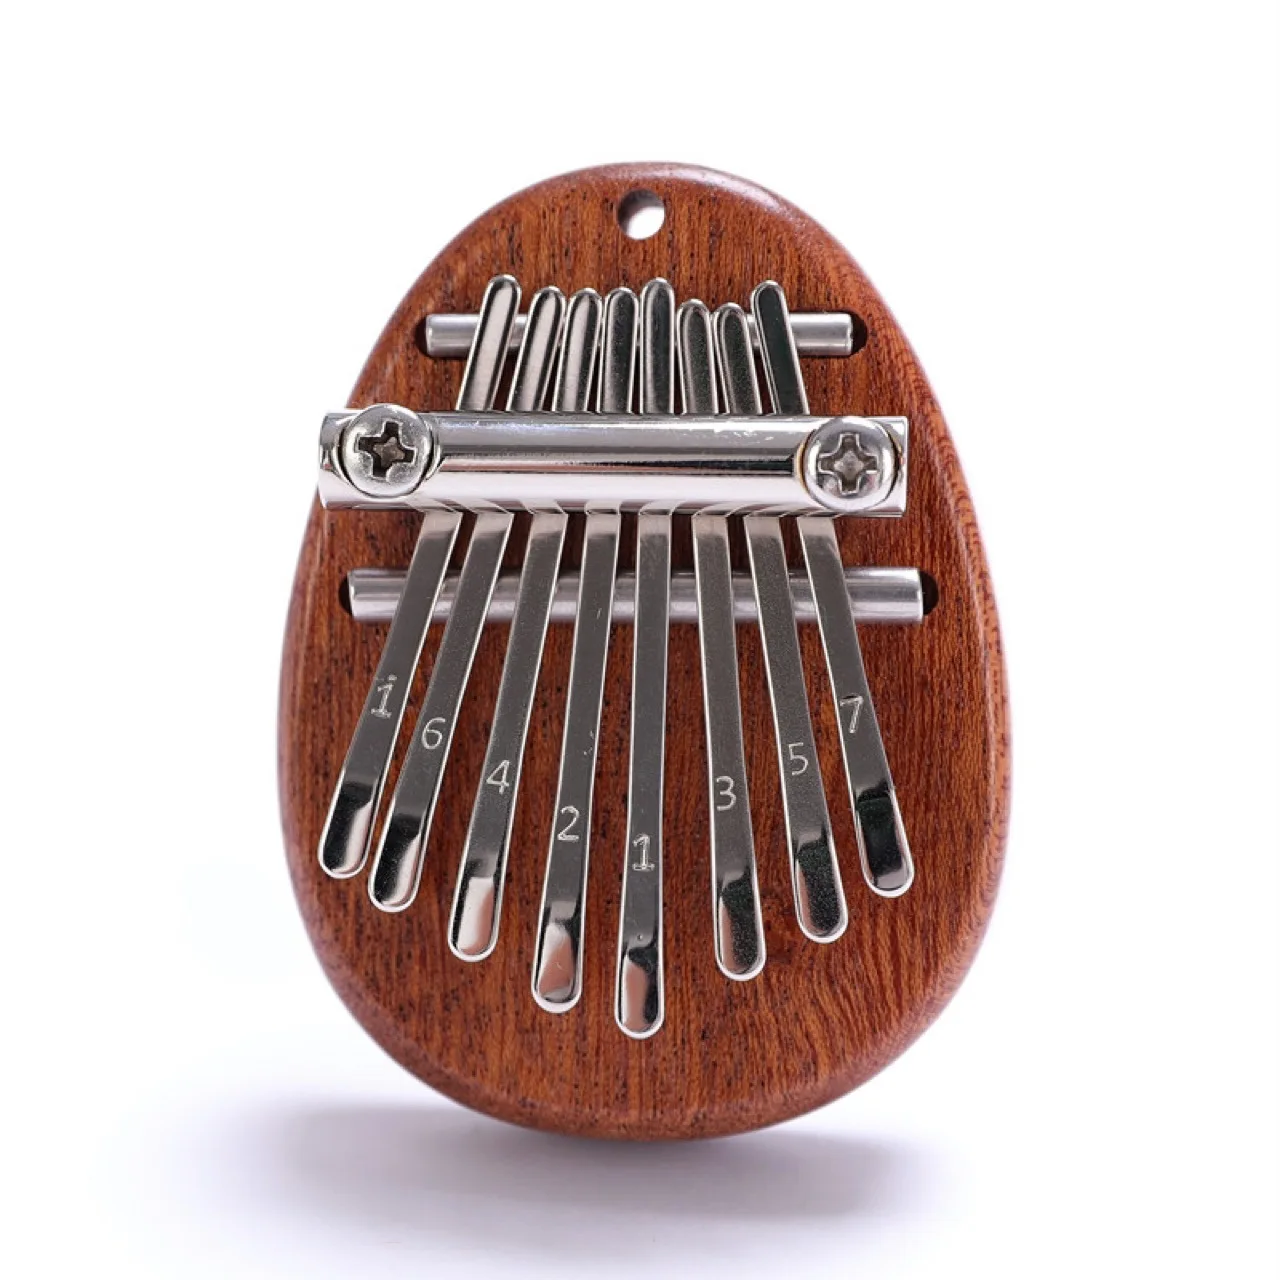 Only1 Design LIFIZ Thumb Piano Mini Kalimba Heart Shaped 8Key Portable Finger Piano Marimba Gift for Kids Adult Unique Gifts for Couples Friends LEFT 